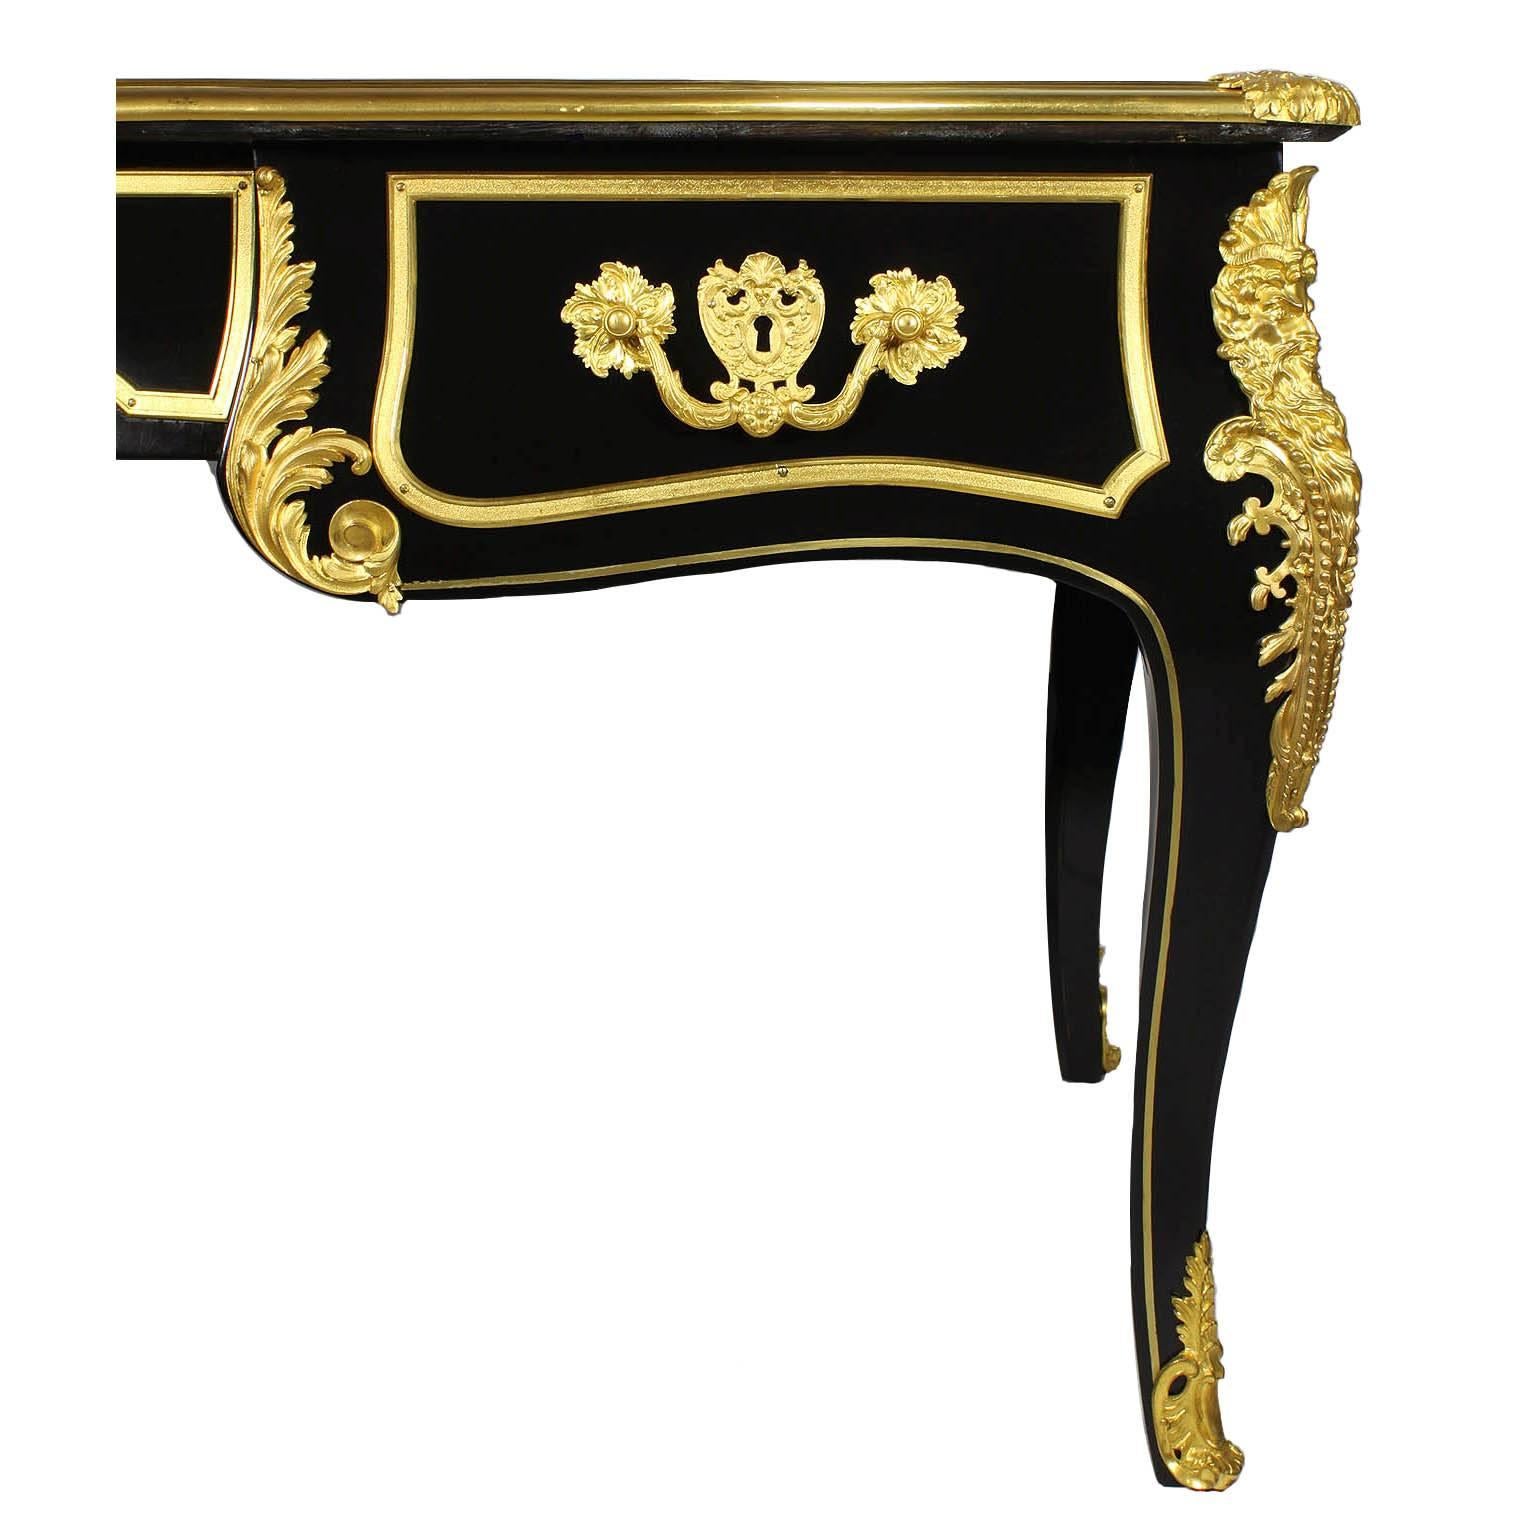 French 19th Century Louis XV Style Ebonized Wood and Gilt Bronze-Mounted Desk For Sale 2